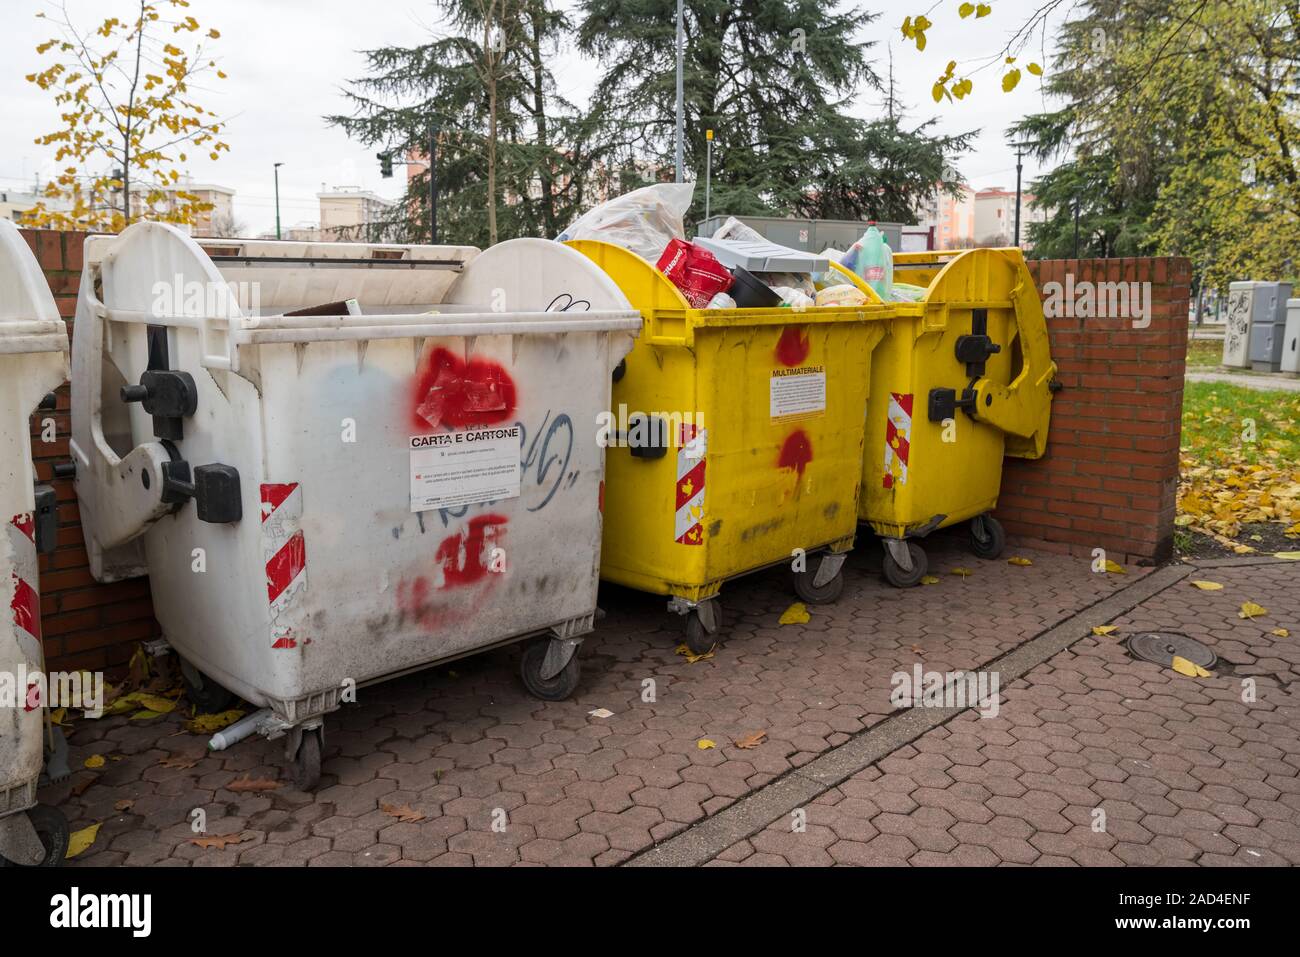 https://c8.alamy.com/comp/2AD4ENF/milan-italy-december-02-2019-selective-waste-collection-bins-big-dumpsters-full-of-garbage-2AD4ENF.jpg